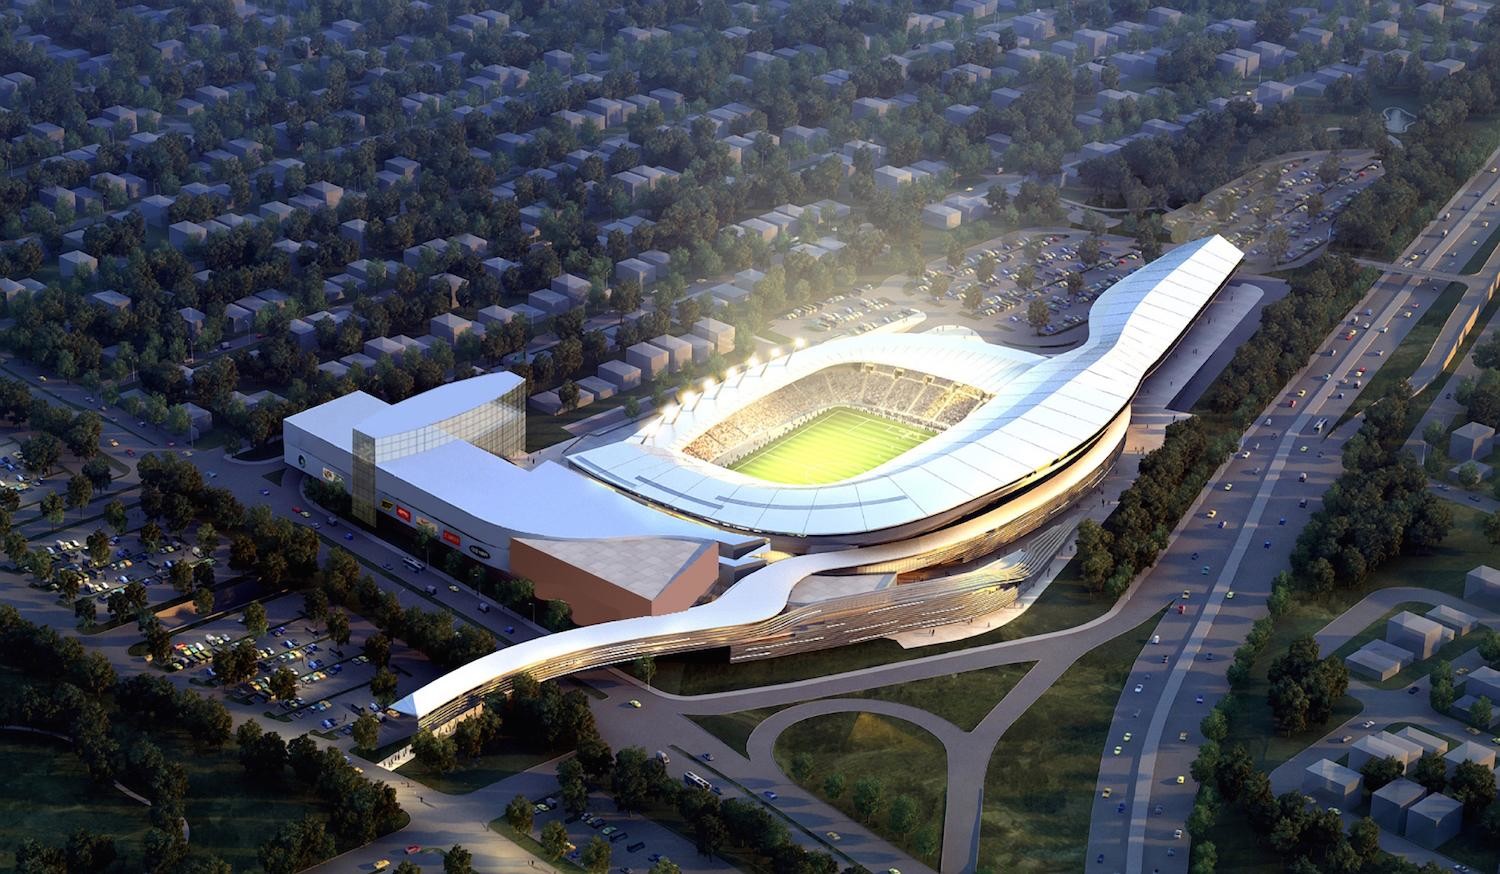 The New York Cosmos’ plan includes a 25,000-seat arena with restaurant and retail space along with a 175-room hotel.